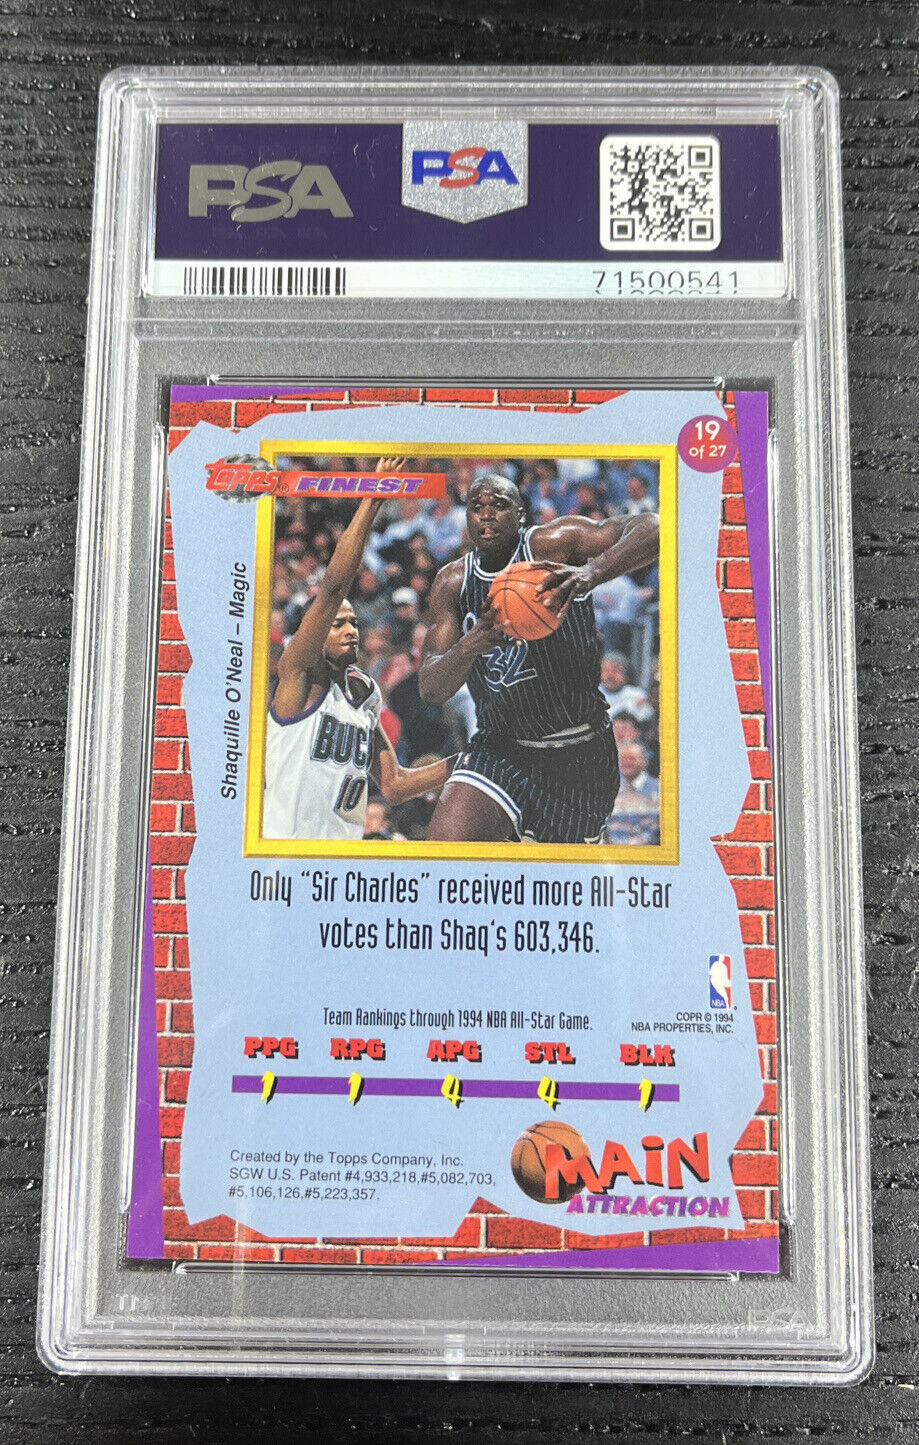 1993-94 Finest Main Attraction #19 Shaquille O'Neal Orlando Magic Lakers PSA 8